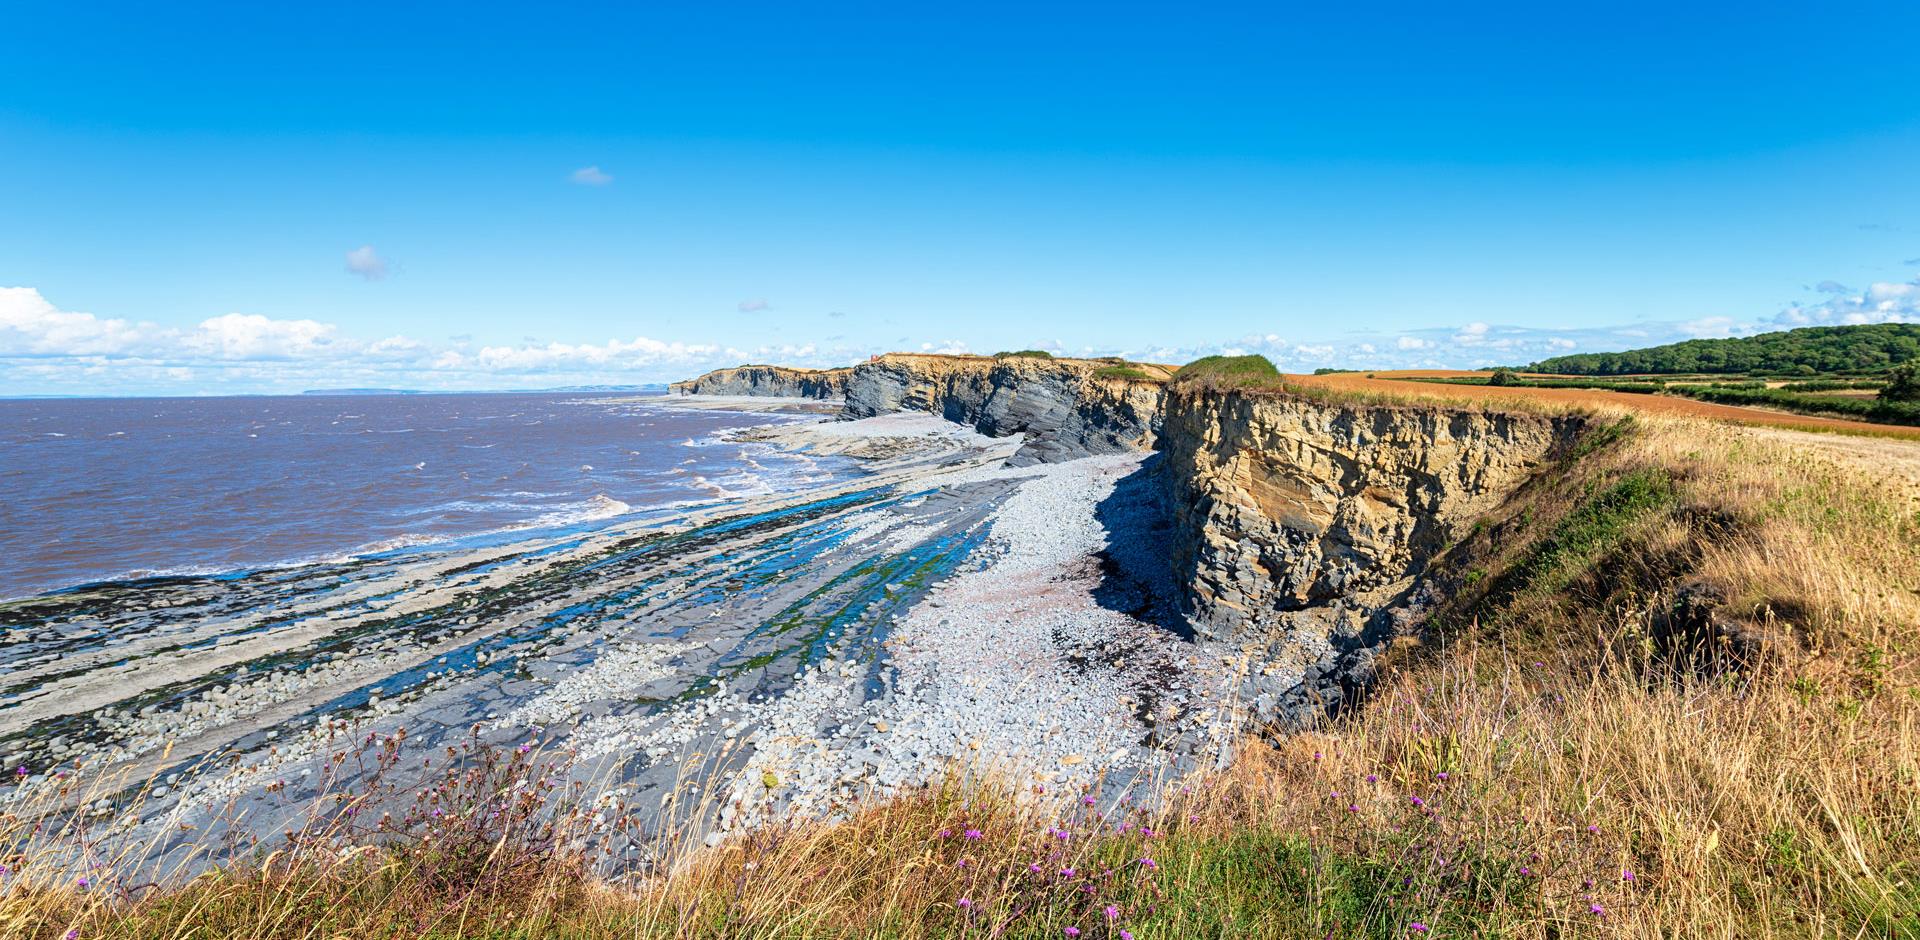 The beach and cliffs at Kilve on the Somerset coast